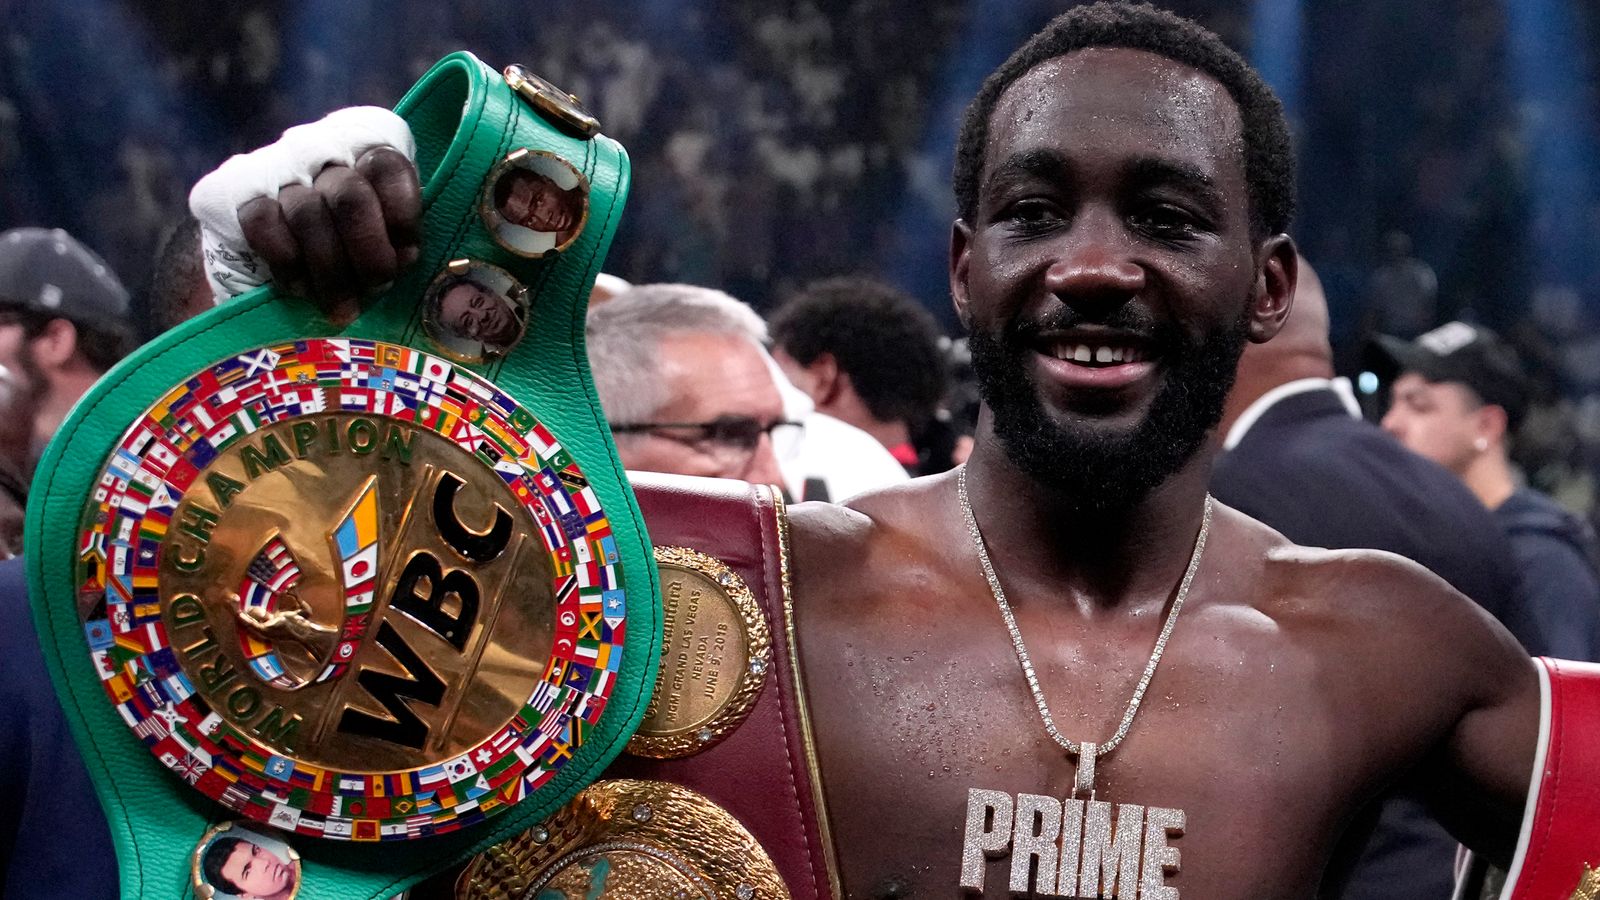 Terence Crawford undisputed welterweight champion with TKO